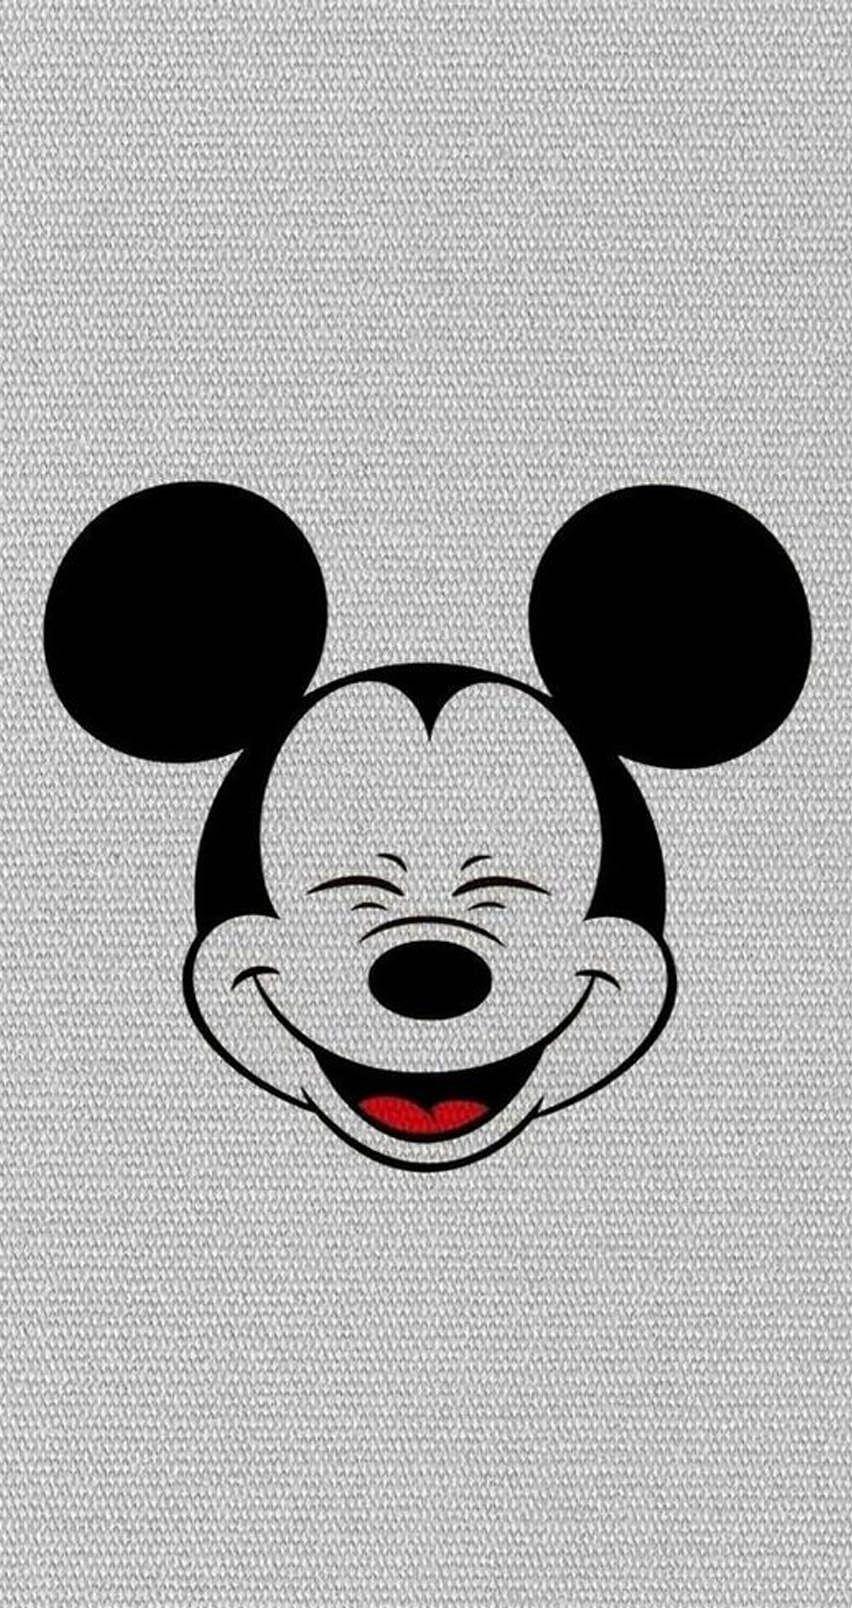 Cute Mickey Mouse background! ❤